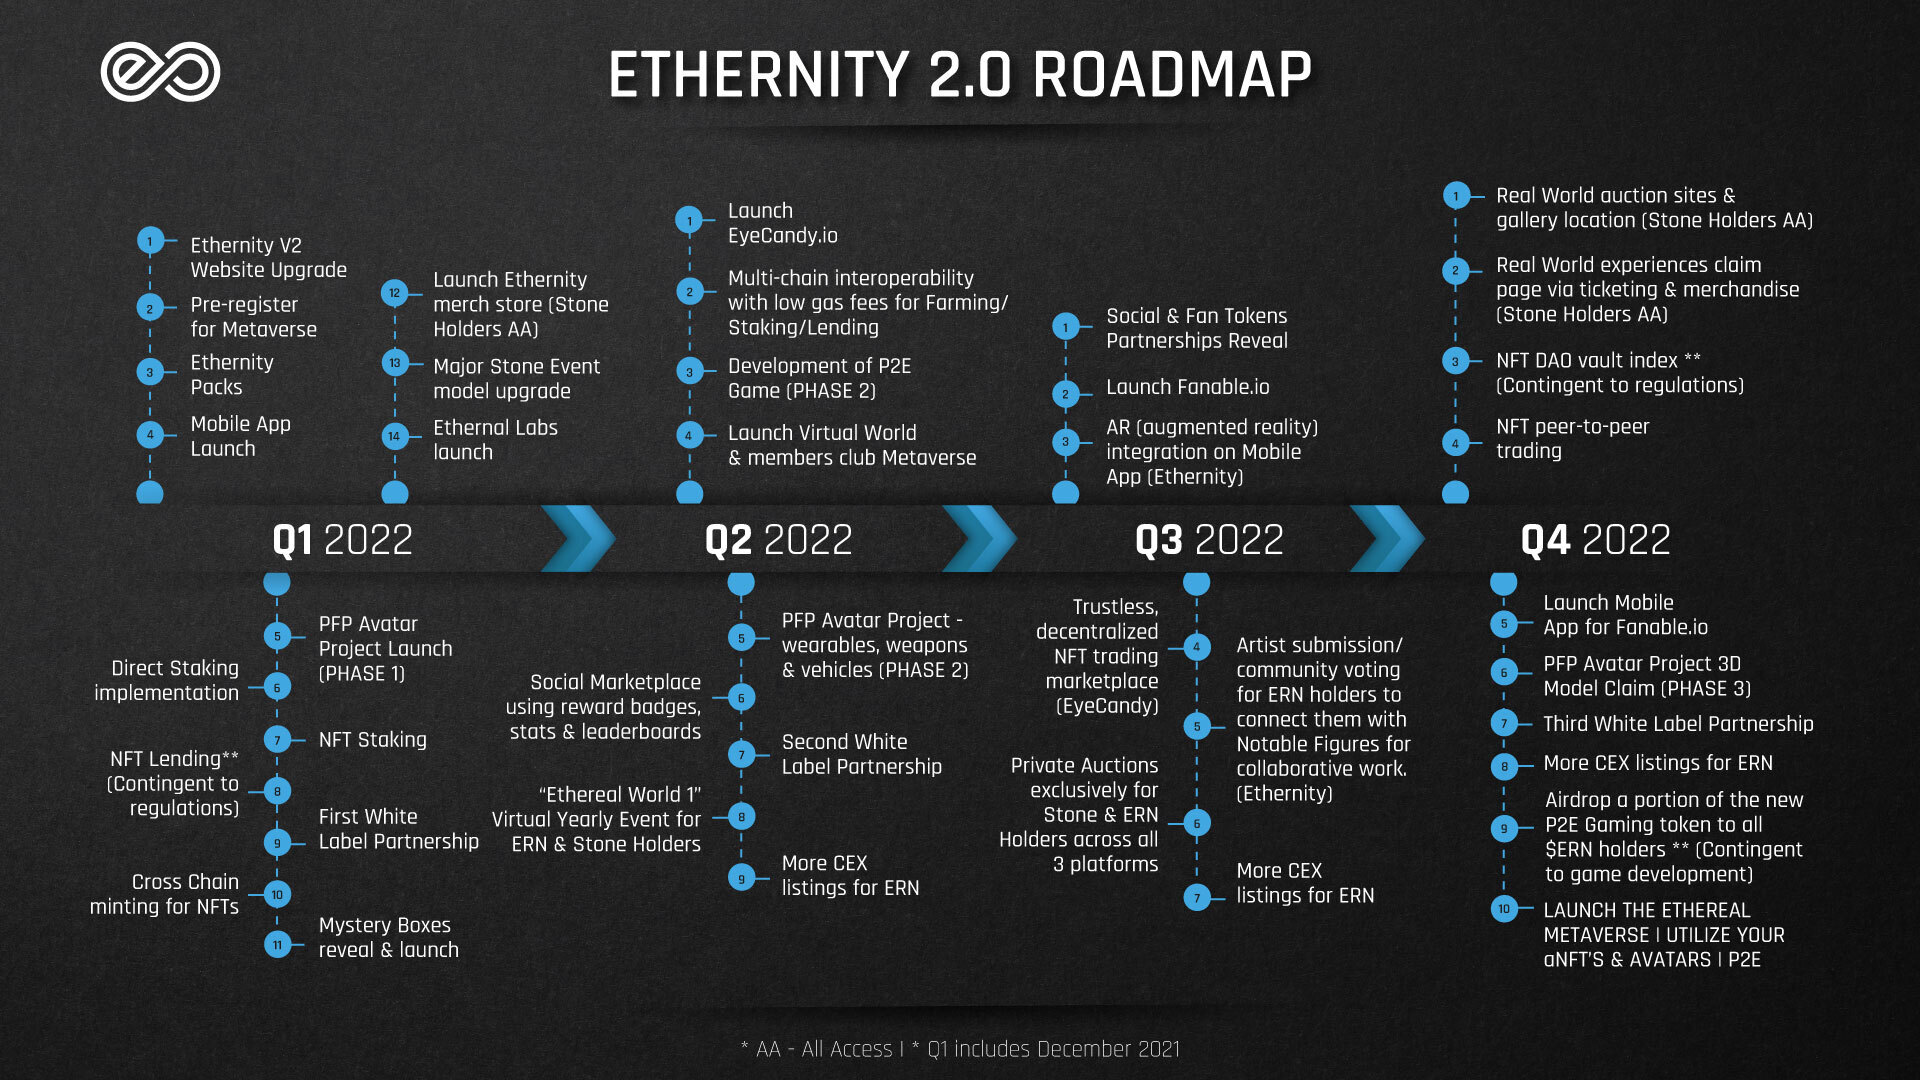 ETHERNITY on Twitter: "The @EthernityChain team is excited to release the  Ethernity 2.0 Roadmap. Discover the next steps we will be taking as a  platform as we continue to expand our product